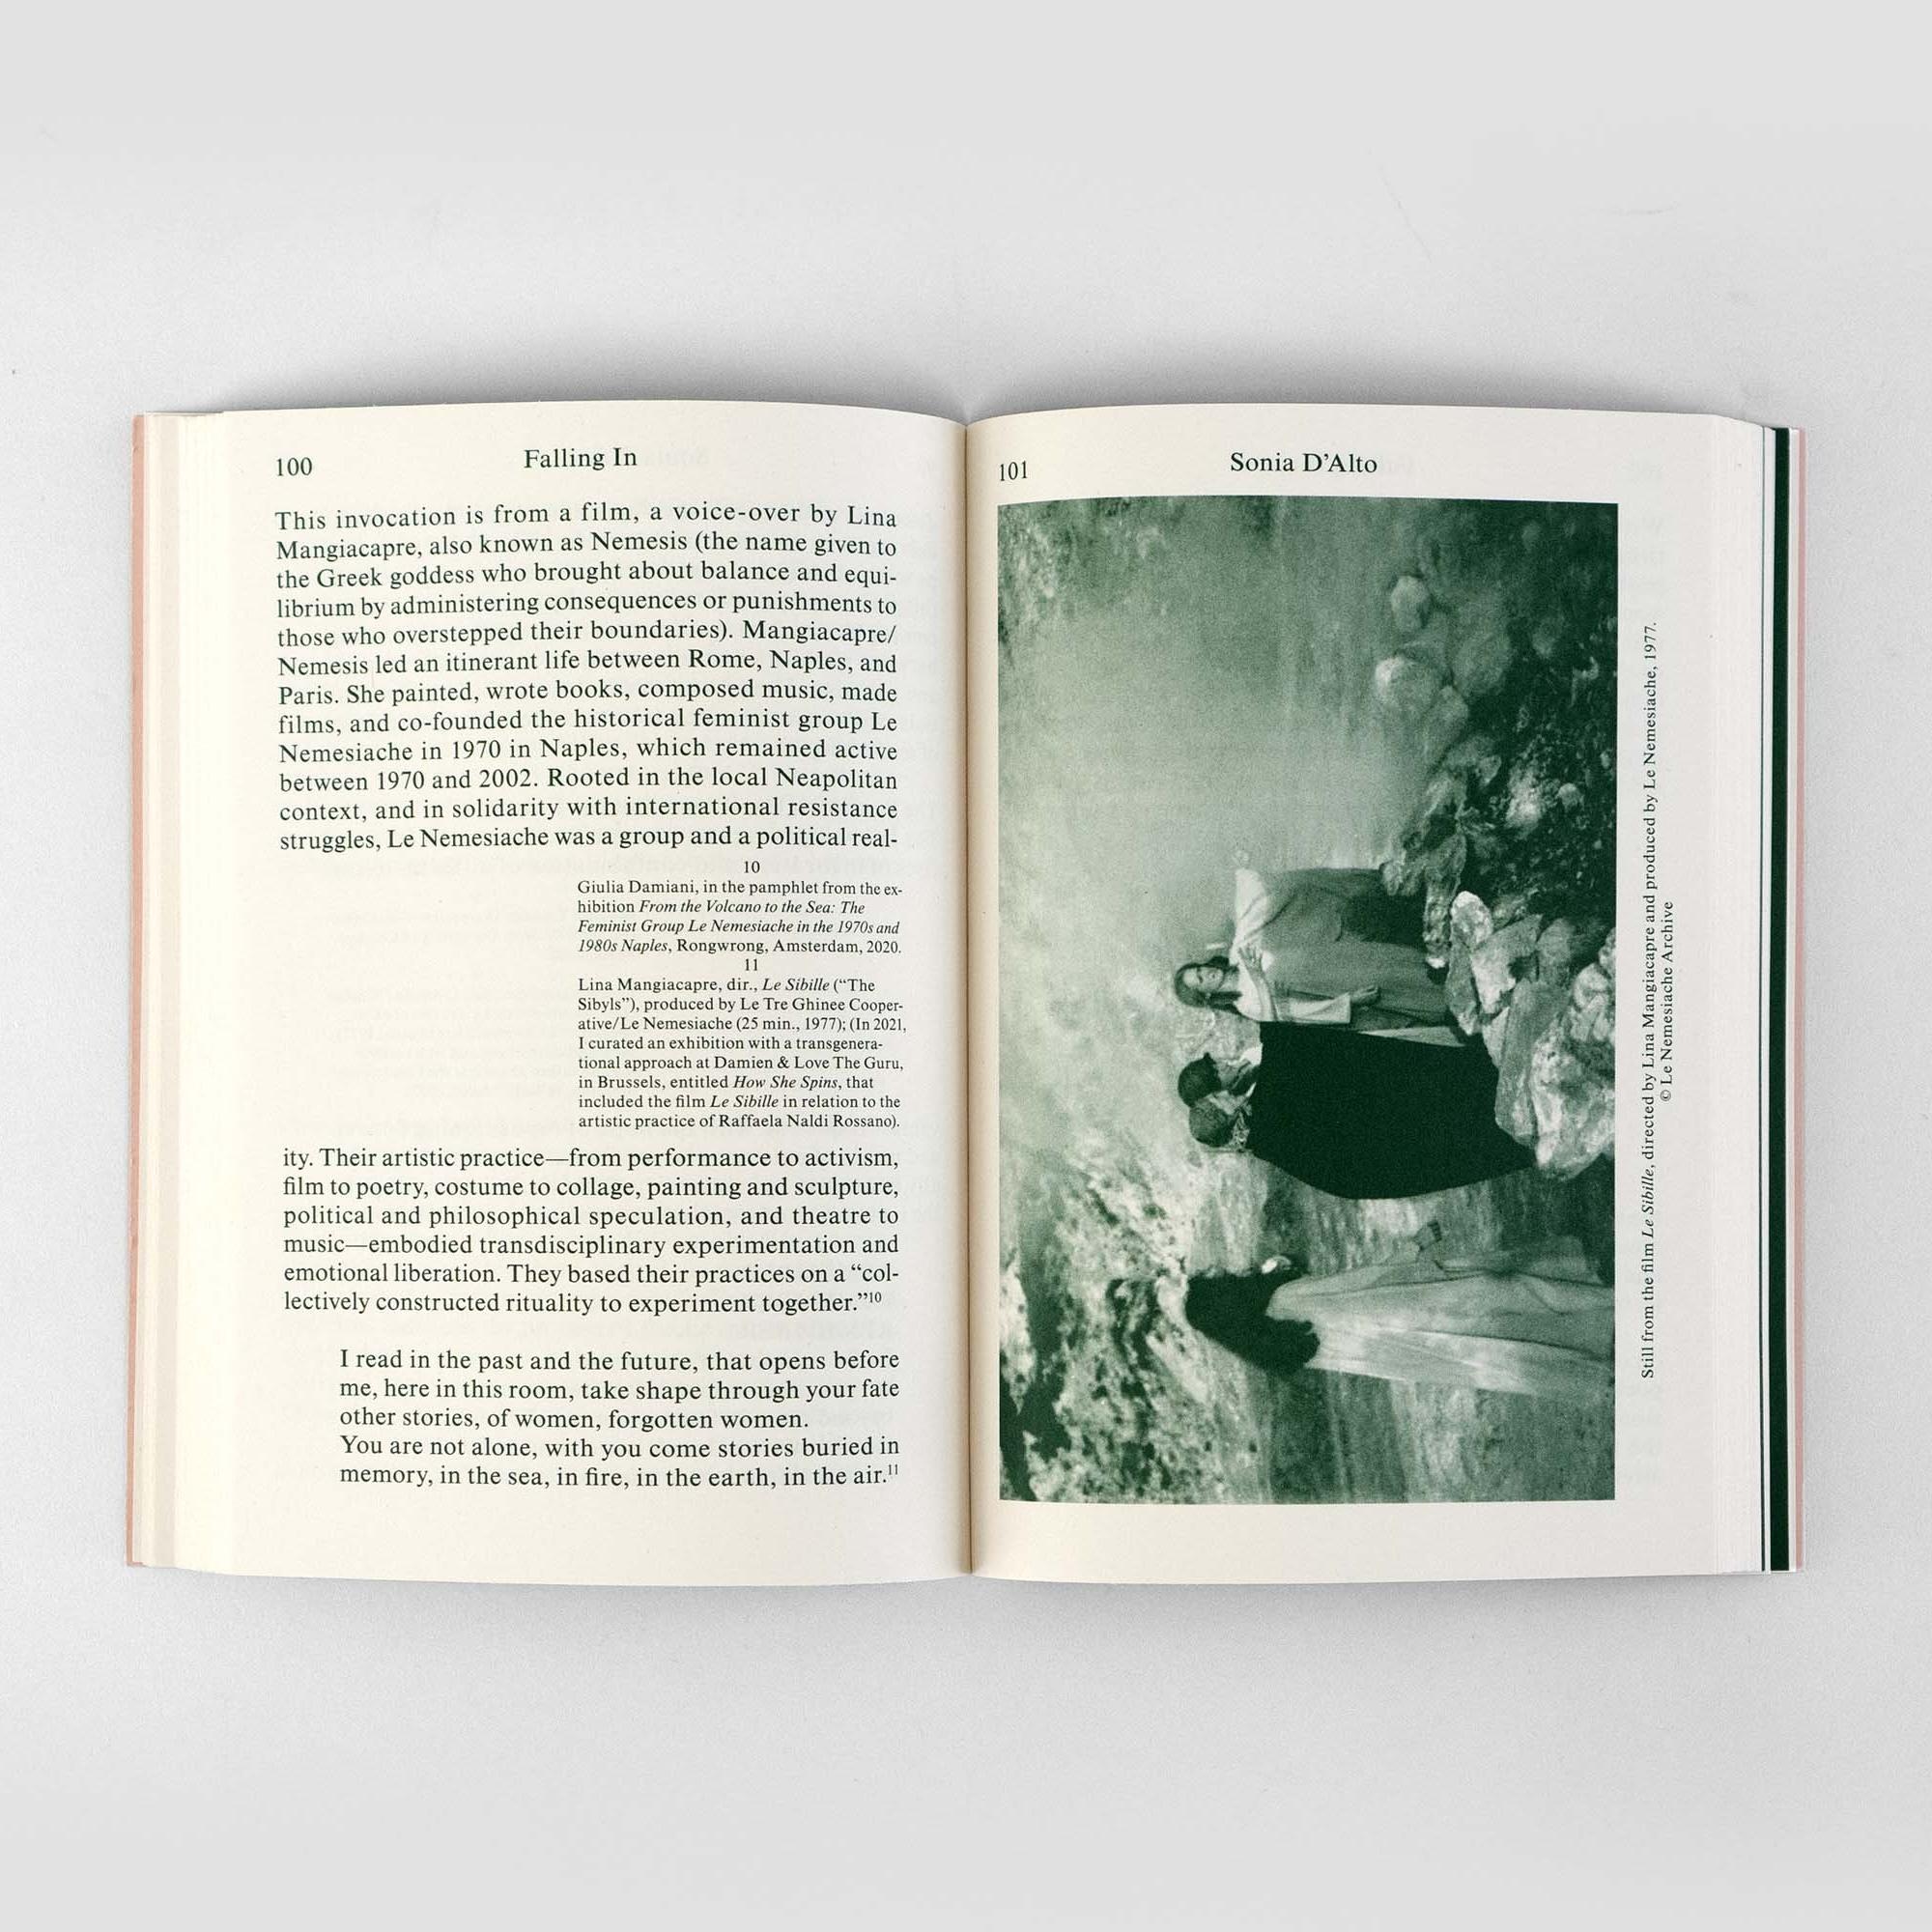 A book spread with text and an image of women in capes.